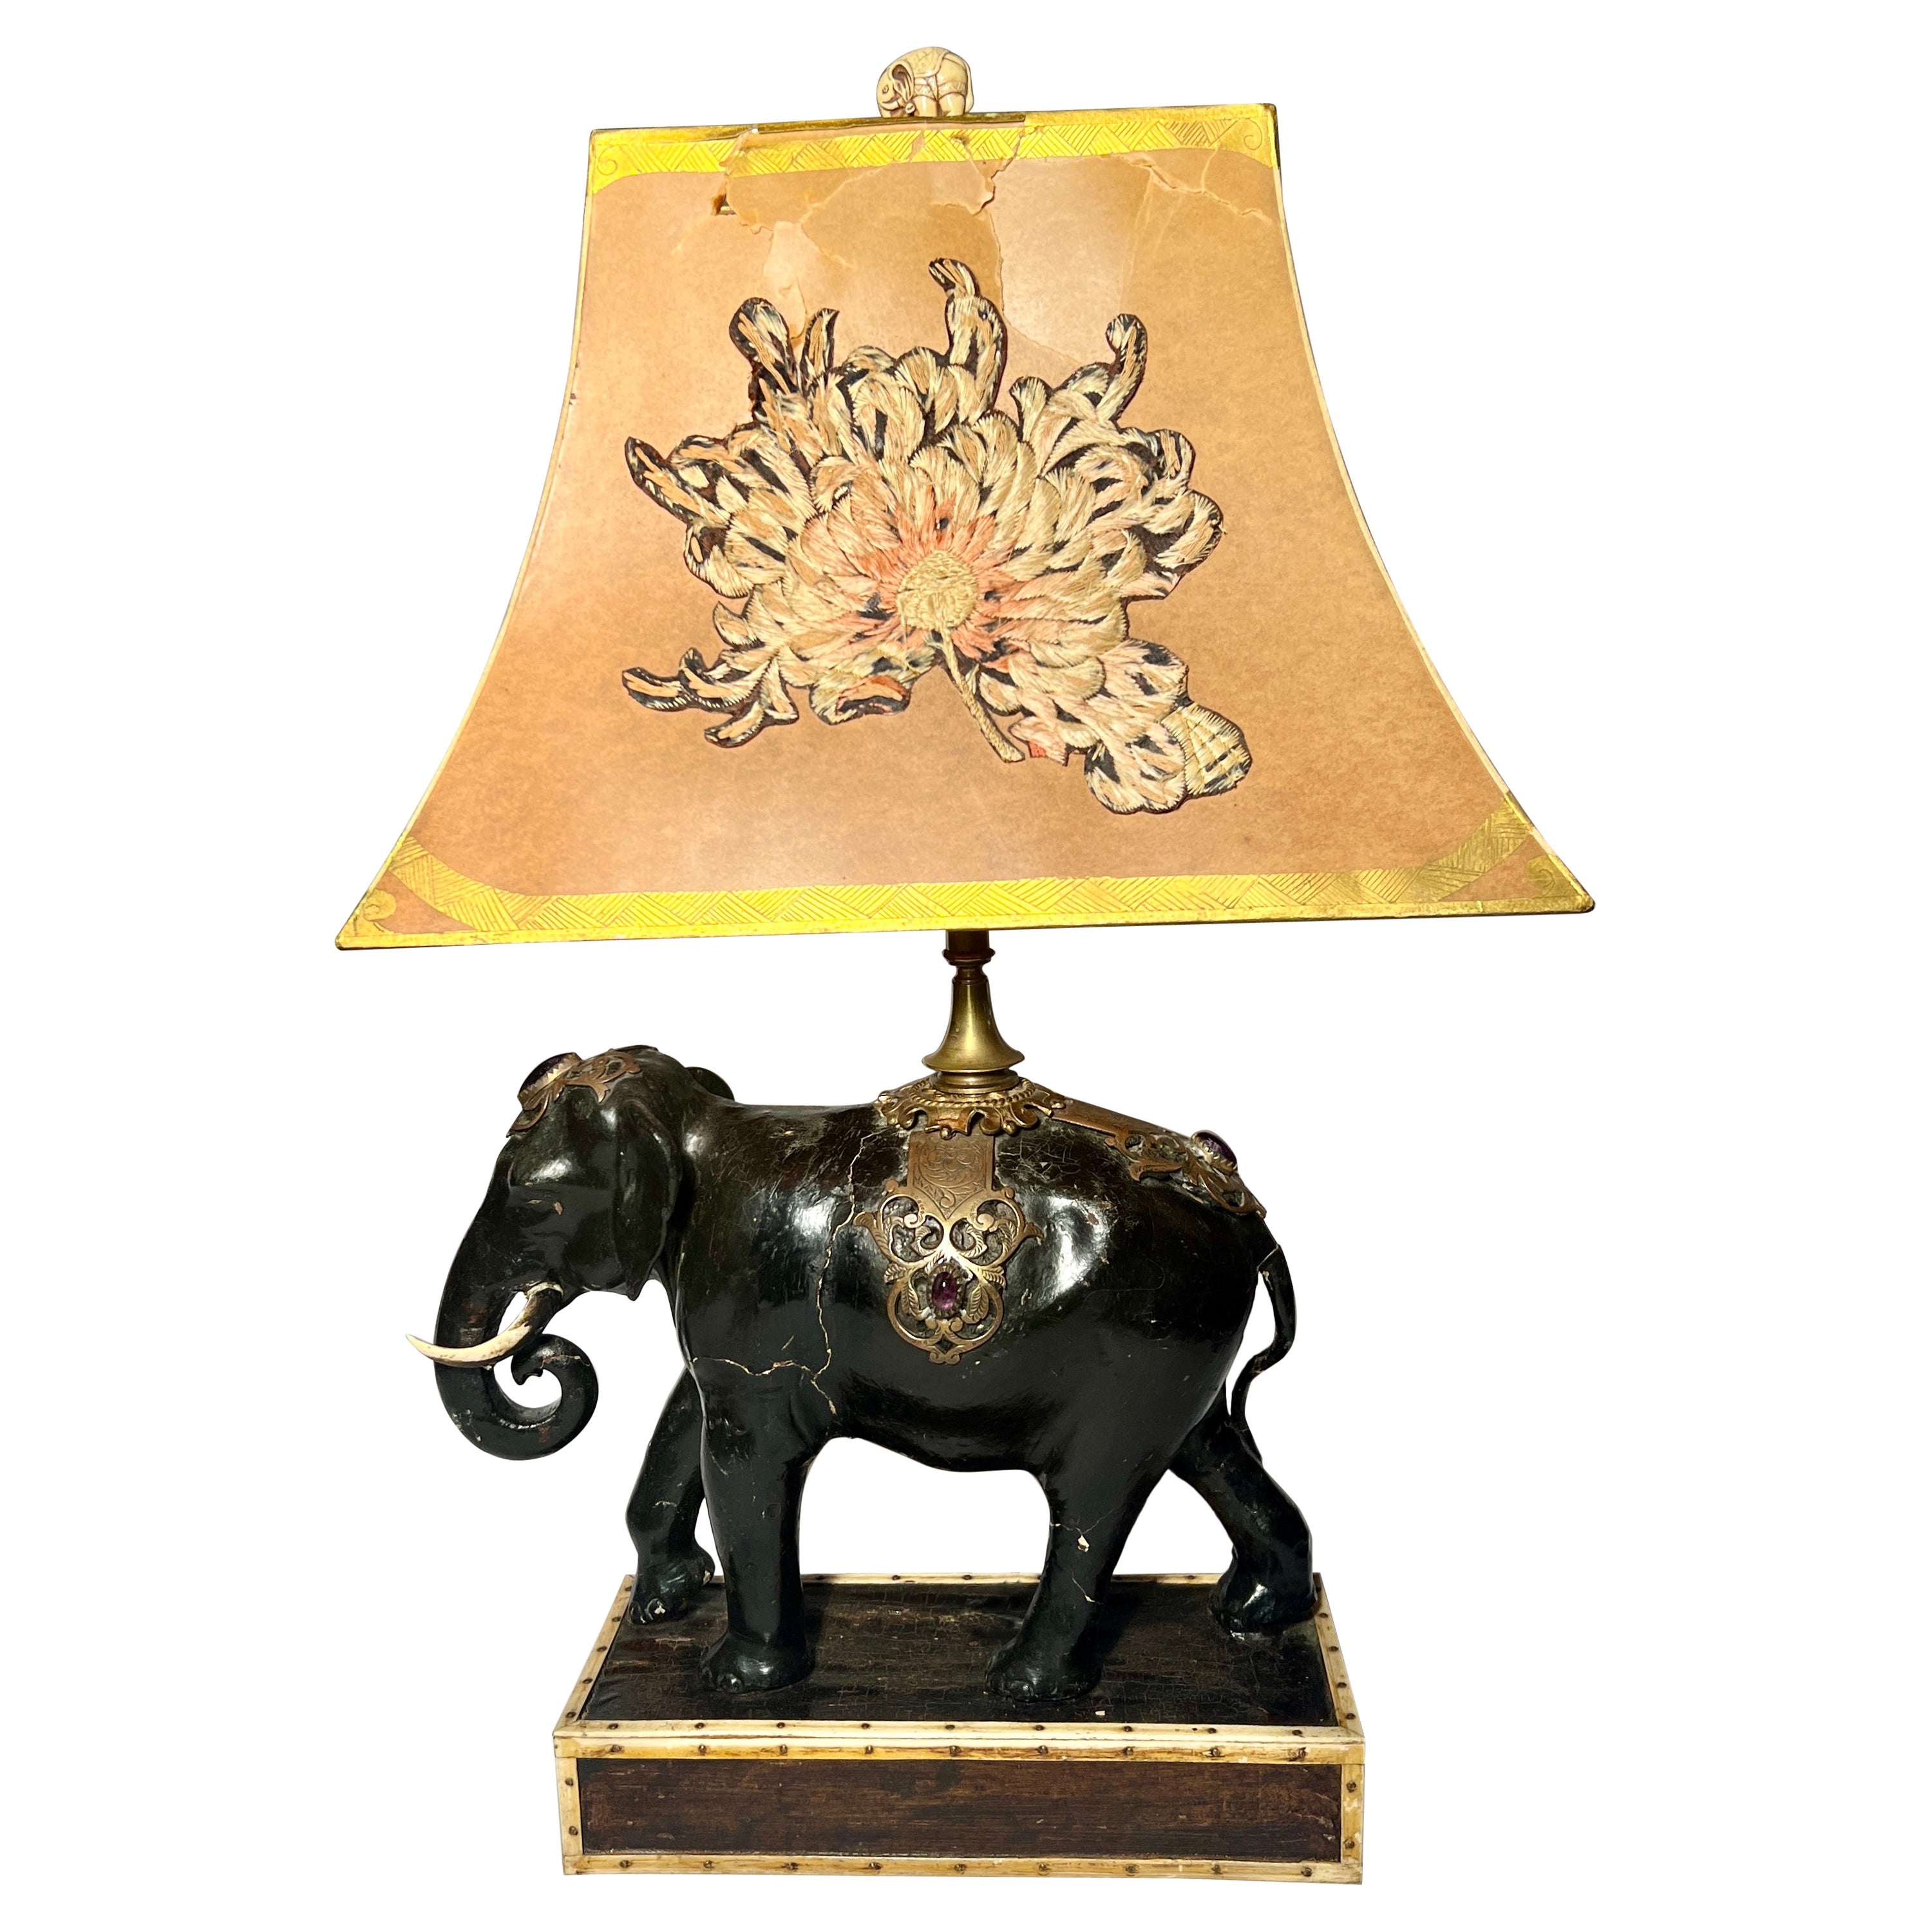 Antique Black Lacquered Elephant Lamp on Stand with Original Shade, Circa 1900. For Sale